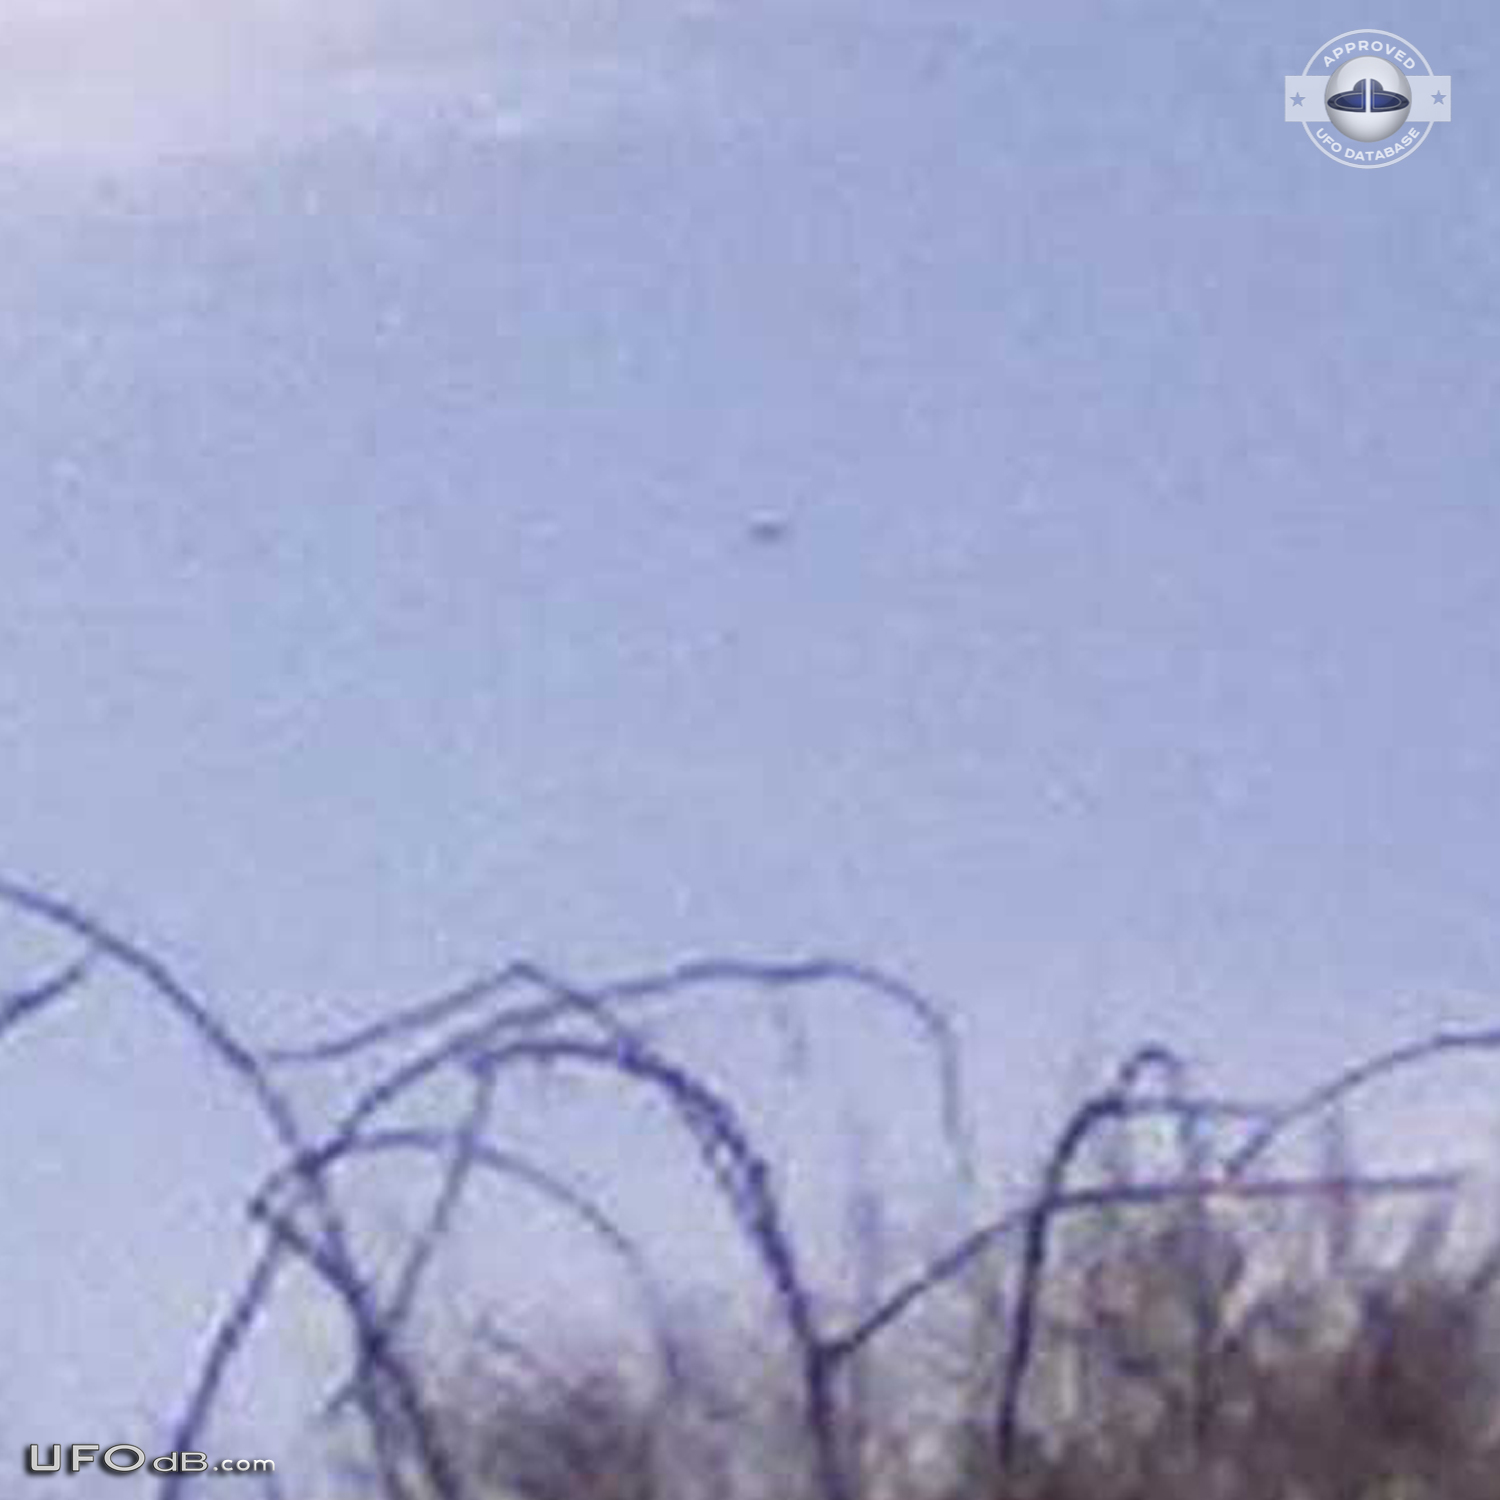 Newyorker with 170 ufo sightings gives us ufo pictures to prove it UFO Picture #401-8